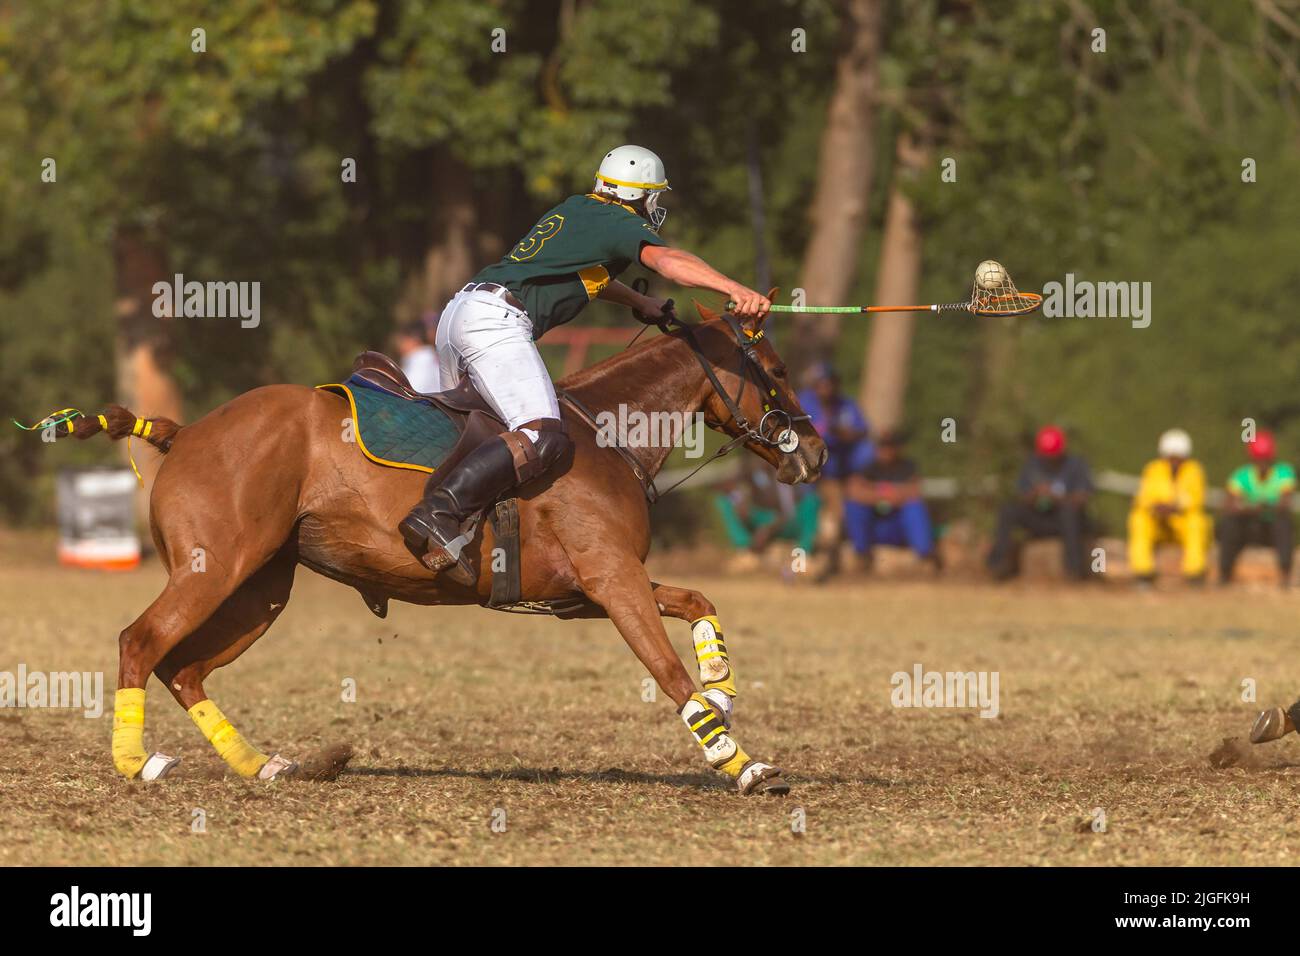 Player horse pony rider unrecognizable carries ball with racket off the ground action play at polo-cross game. Stock Photo